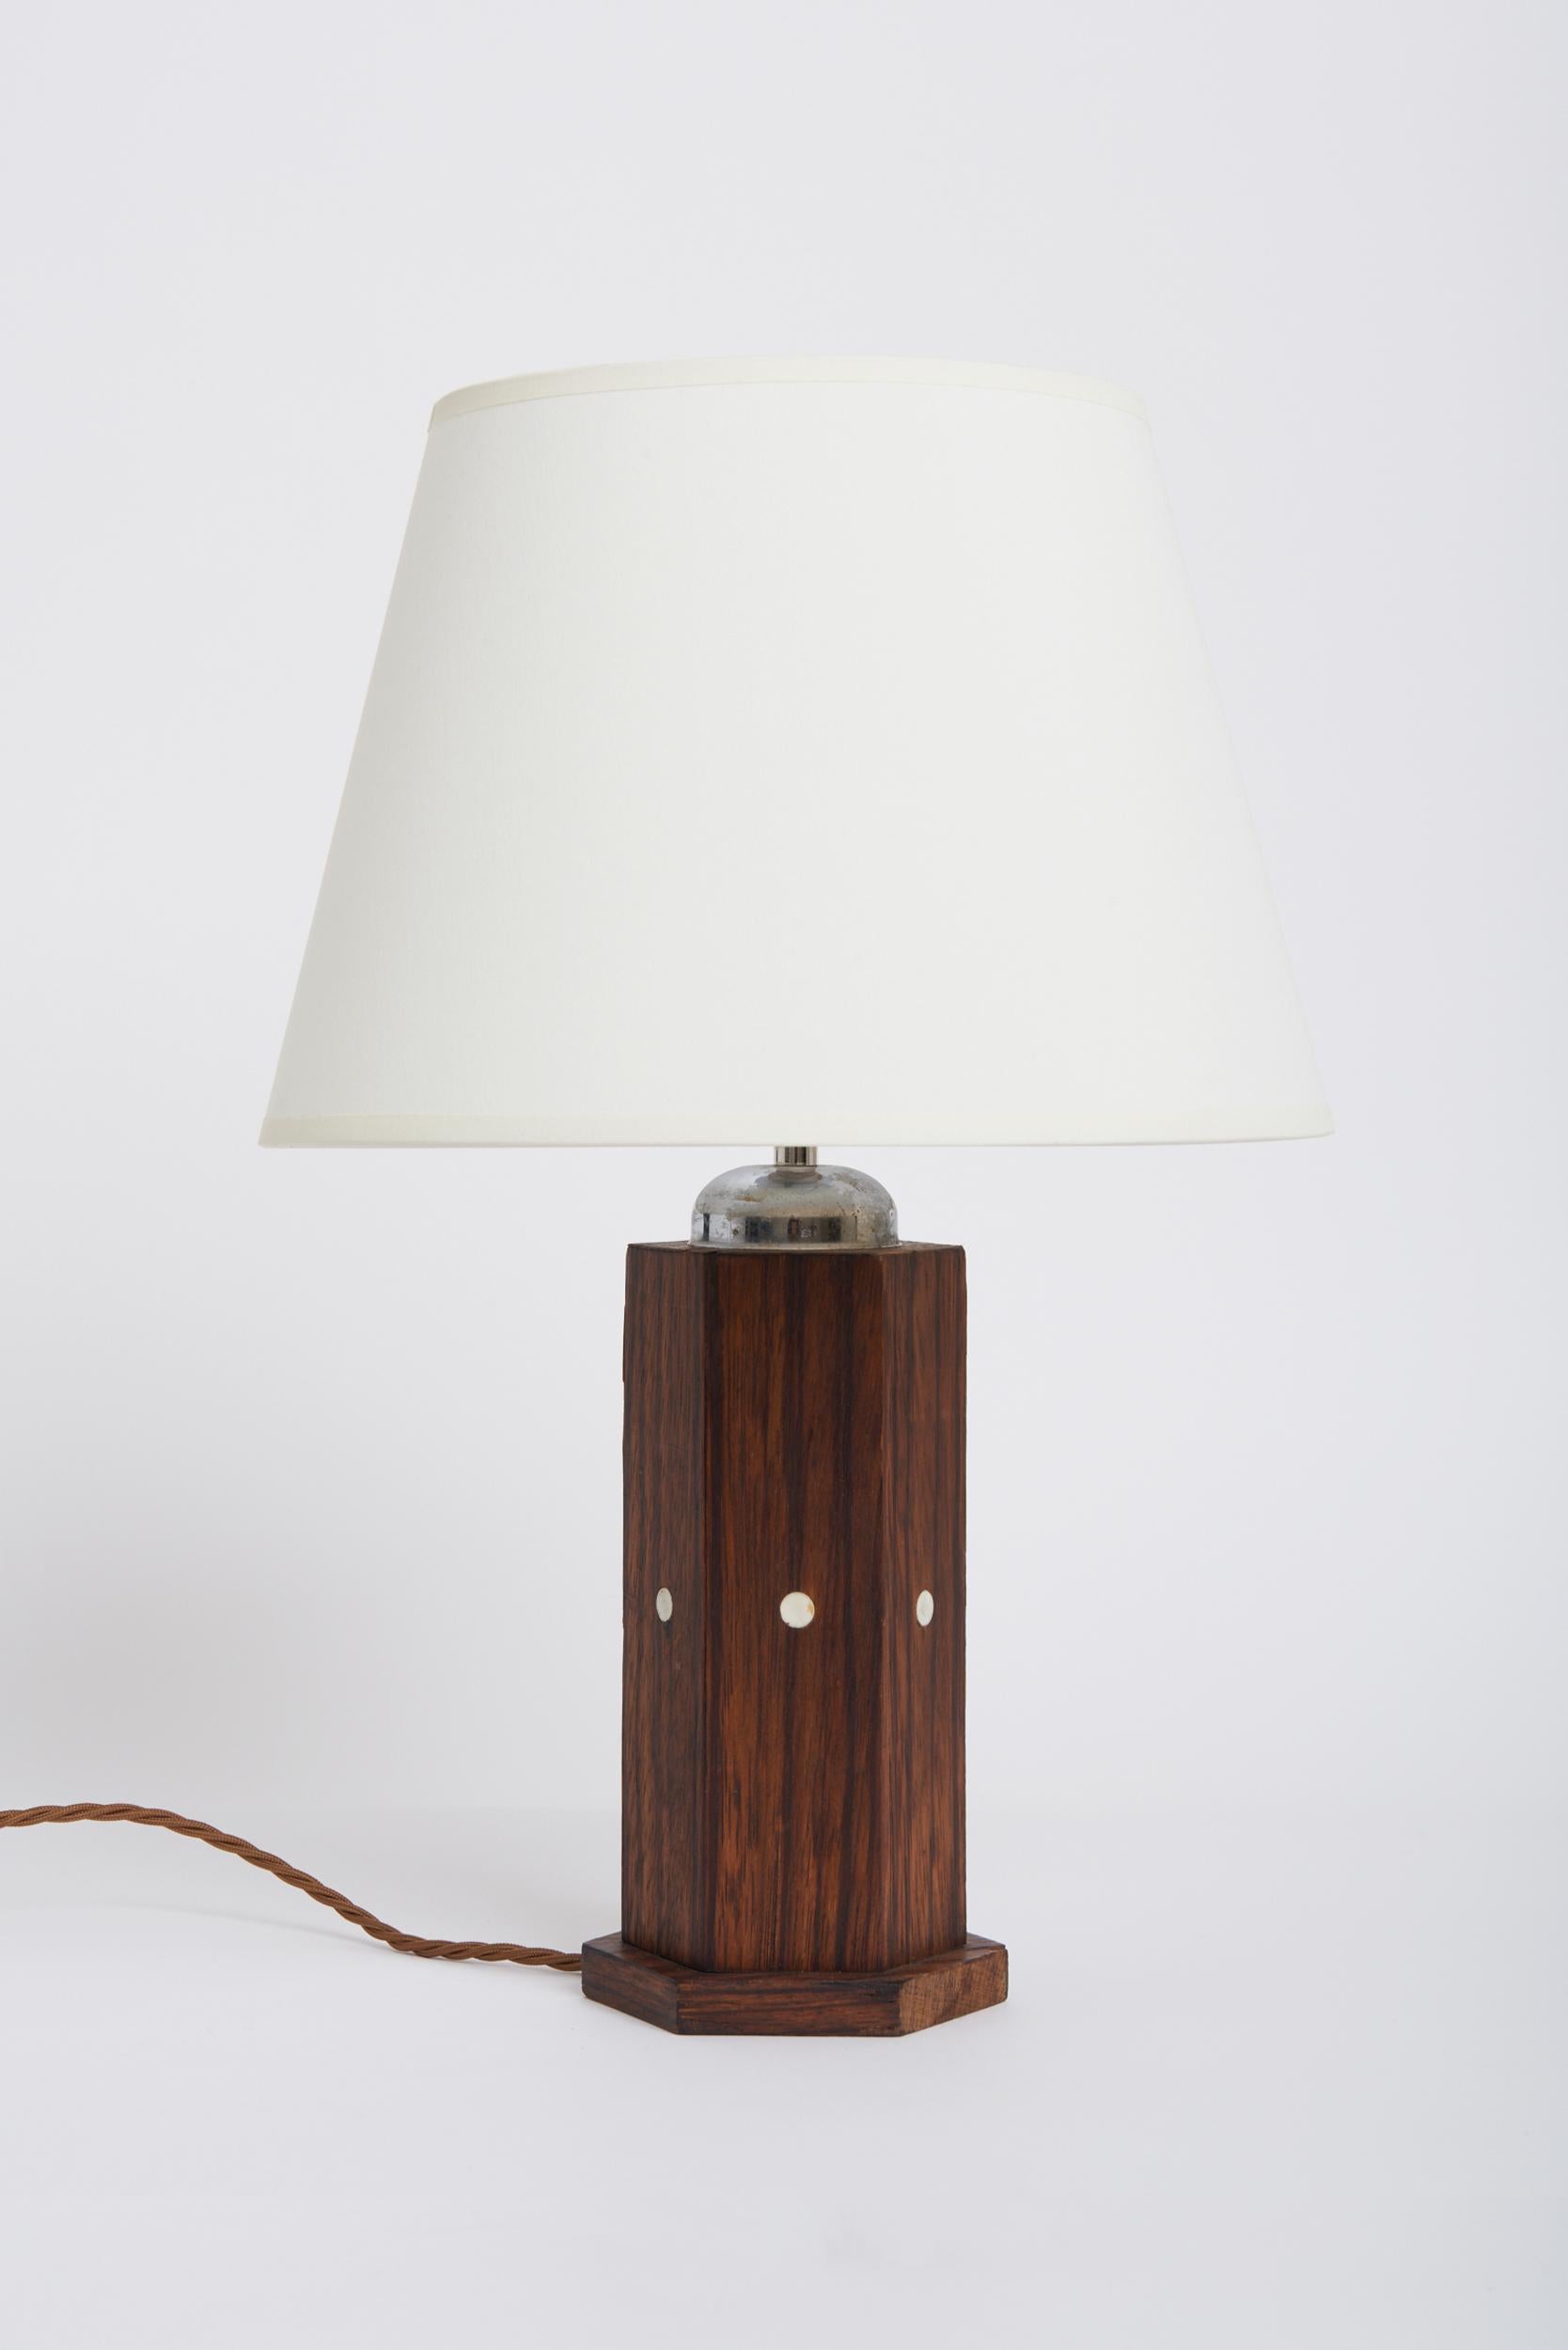 An Art Deco Macassar ebony table lamp by Jules Leleu (1883-1961).
Stamped.
France, Circa 1930.
With the shade: 43 cm high by 26 cm diameter.
Lamp base only: 31 cm high by 12 cm diameter.